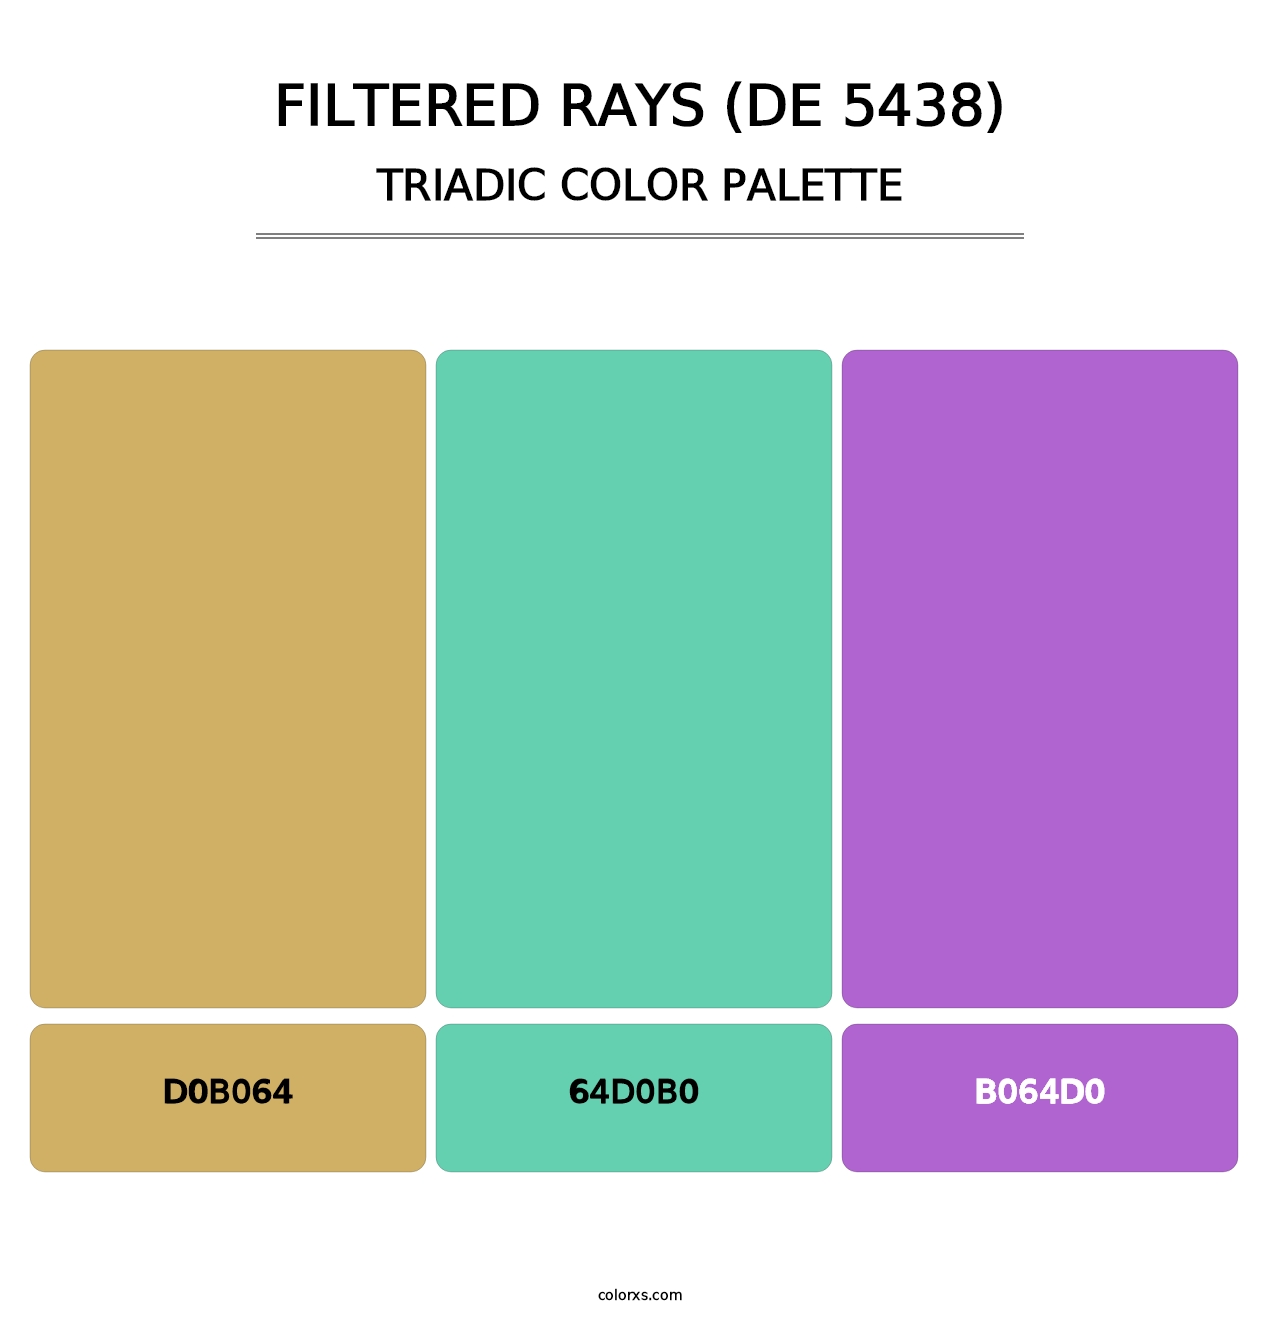 Filtered Rays (DE 5438) - Triadic Color Palette